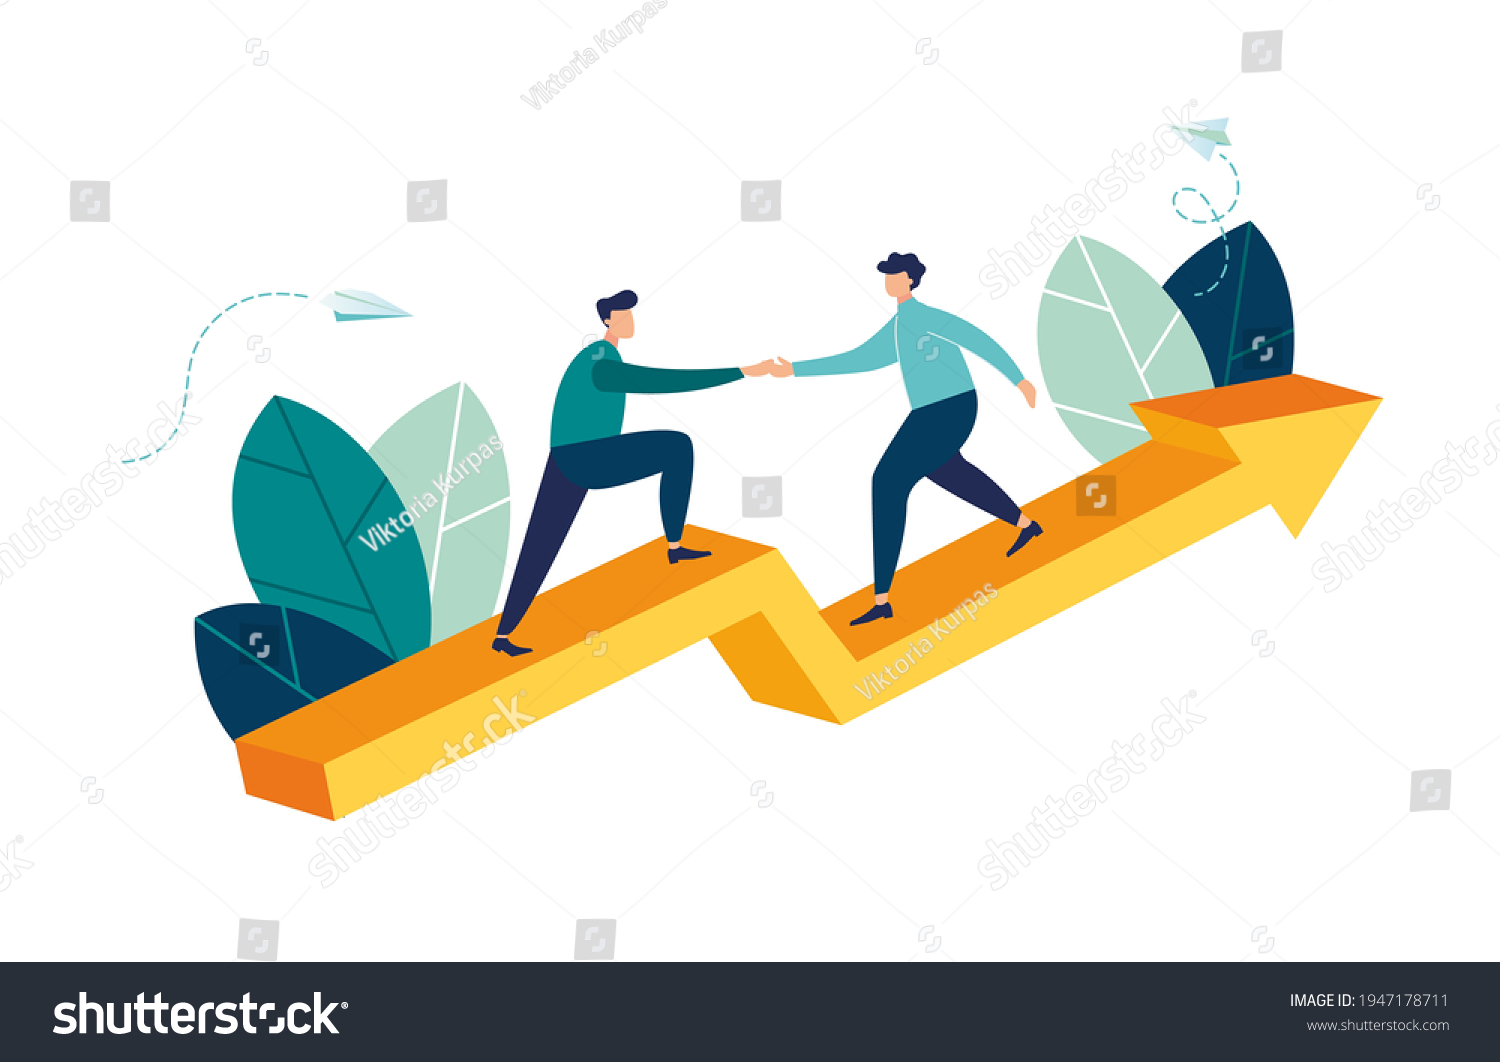 Goal-focused, increase motivation, way to achieve the goal, support and teamwork, help in overcoming obstacles, vector illustration  #1947178711